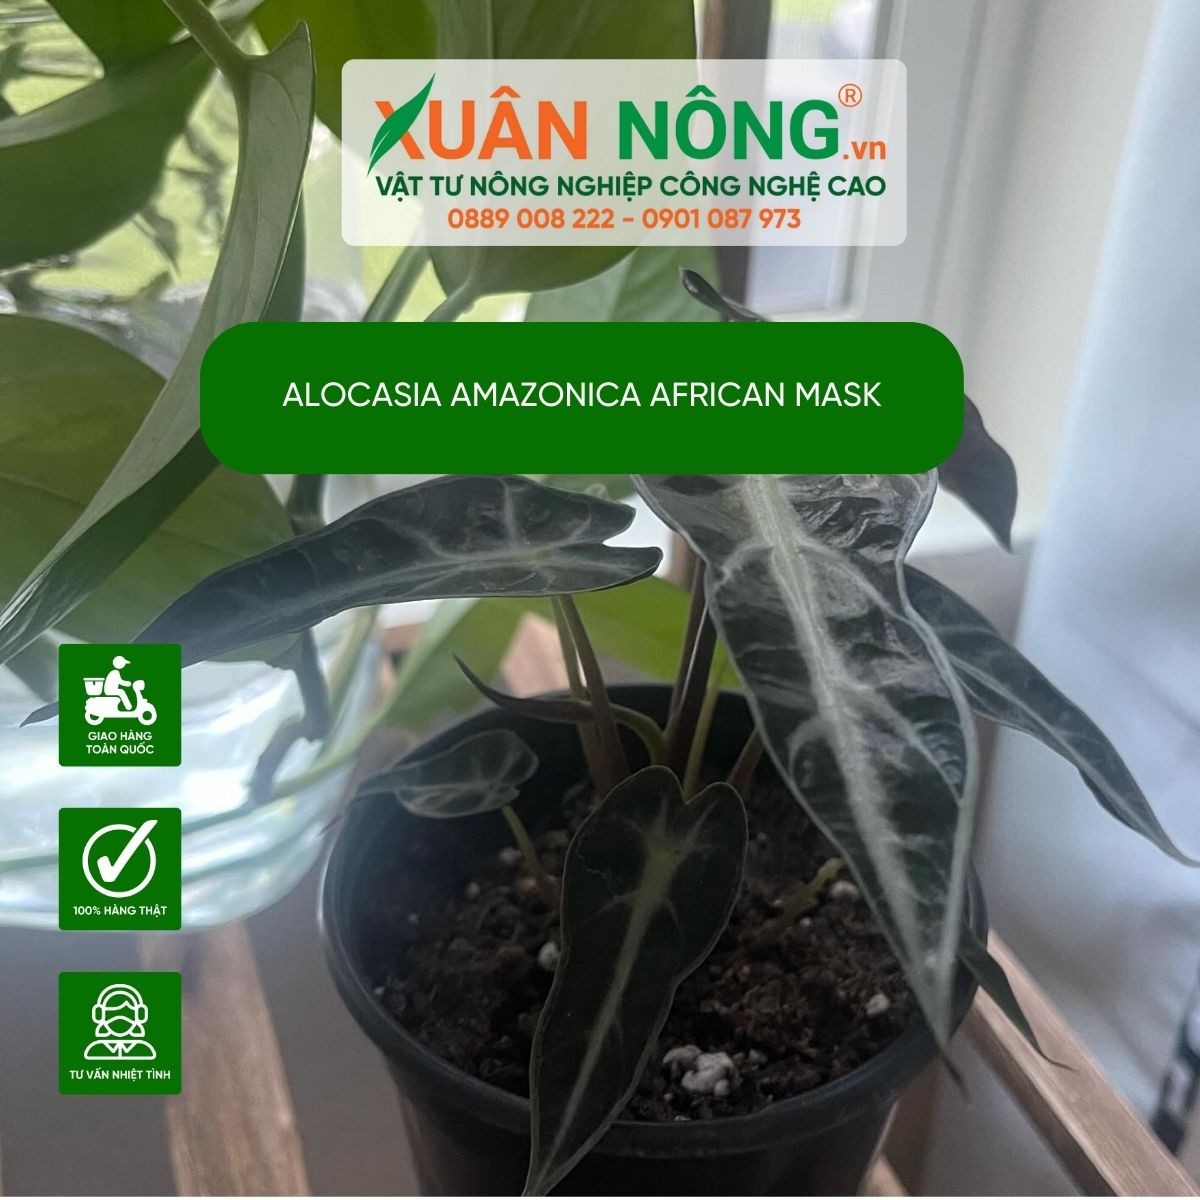 Alocasia-Amazonica-African-Mask-cach-tong